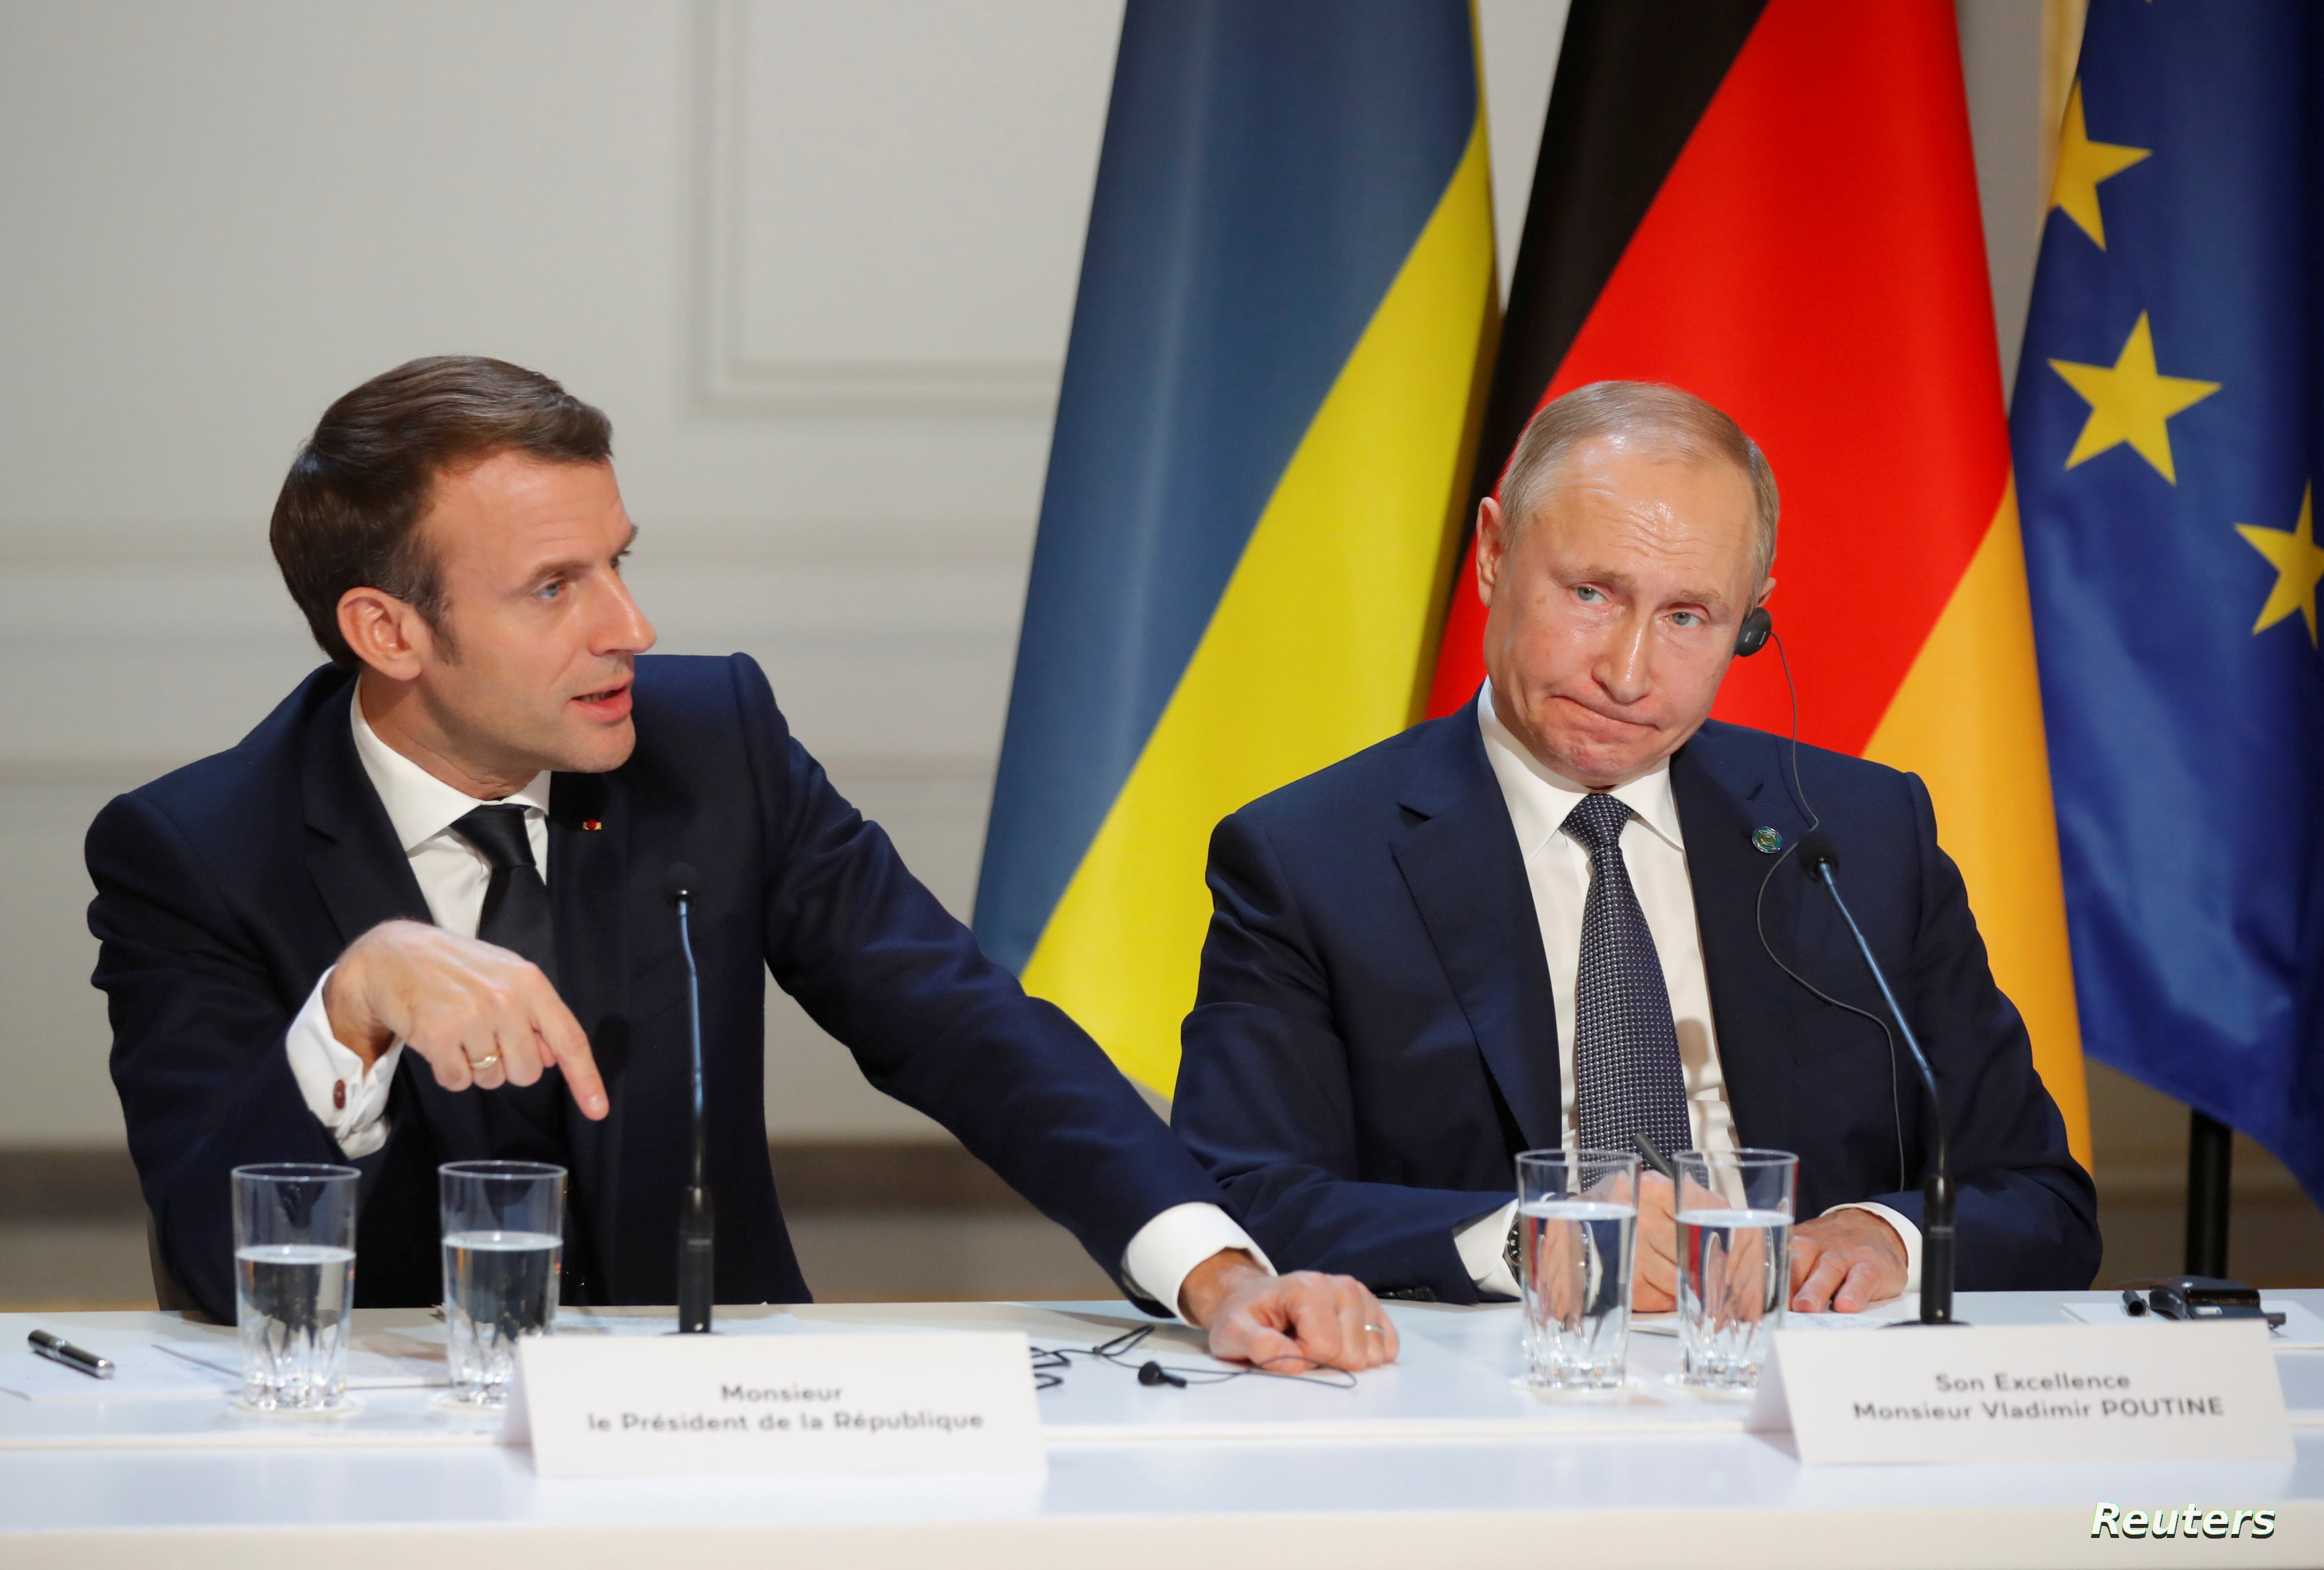 French President Emmanuel Macron and Russia's President Vladimir Putin attend a joint news conference after a Normandy-format summit in Paris, France December 9, 2019. REUTERS/Charles Platiau/Pool